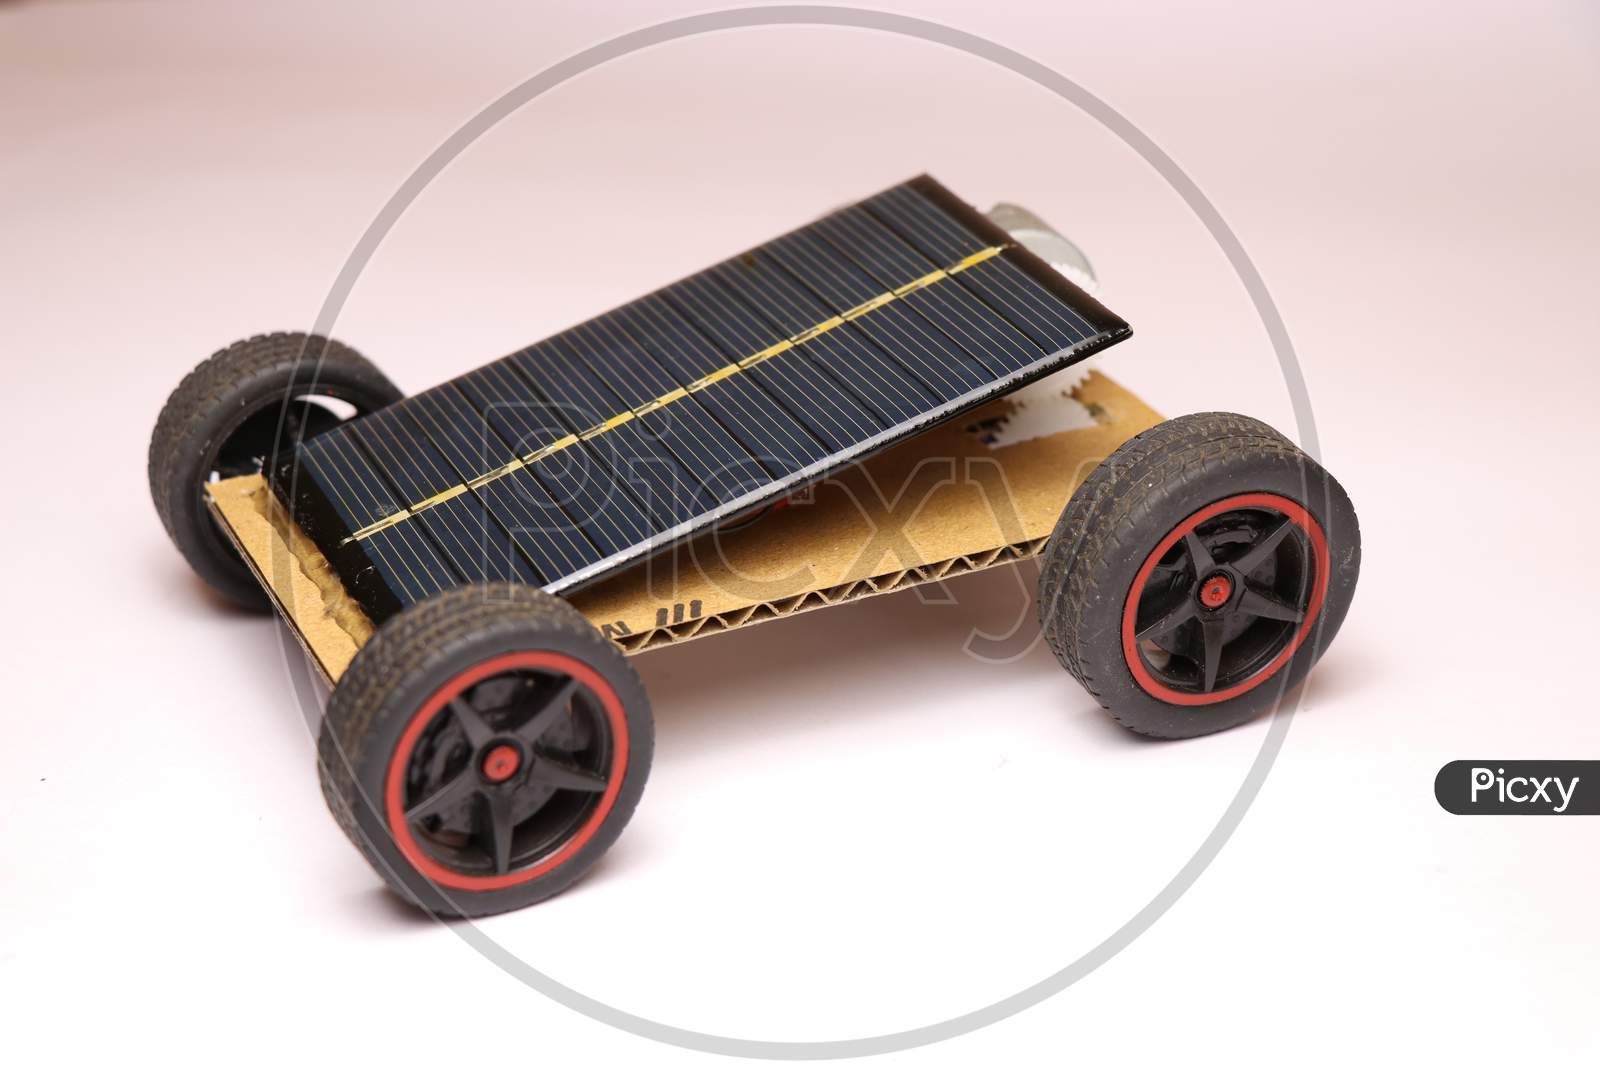 Small Solar Powered Car With Mini Solar Cells Panel At The Top.This Is A Home Made Solar Powered Car